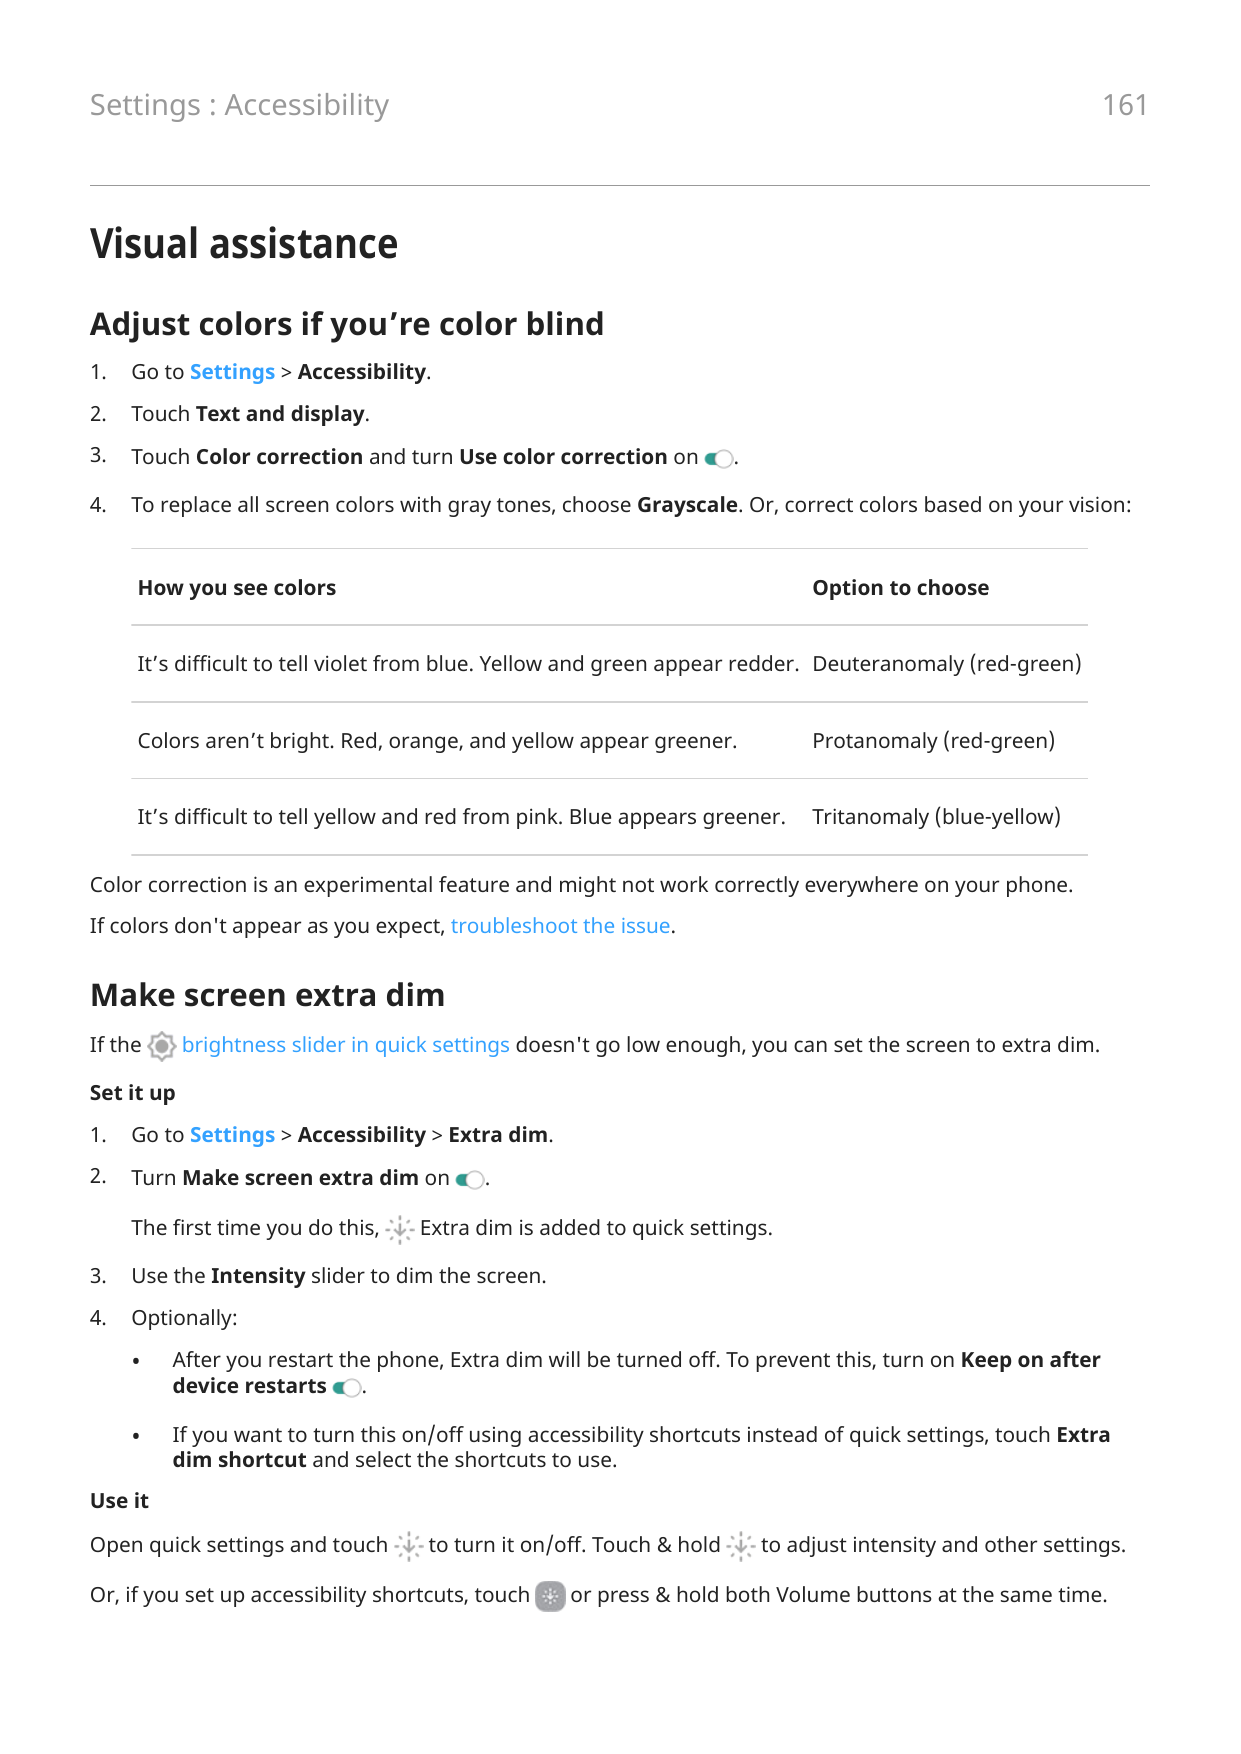 161Settings : AccessibilityVisual assistanceAdjust colors if you’re color blind1.Go to Settings > Accessibility.2.Touch Text and